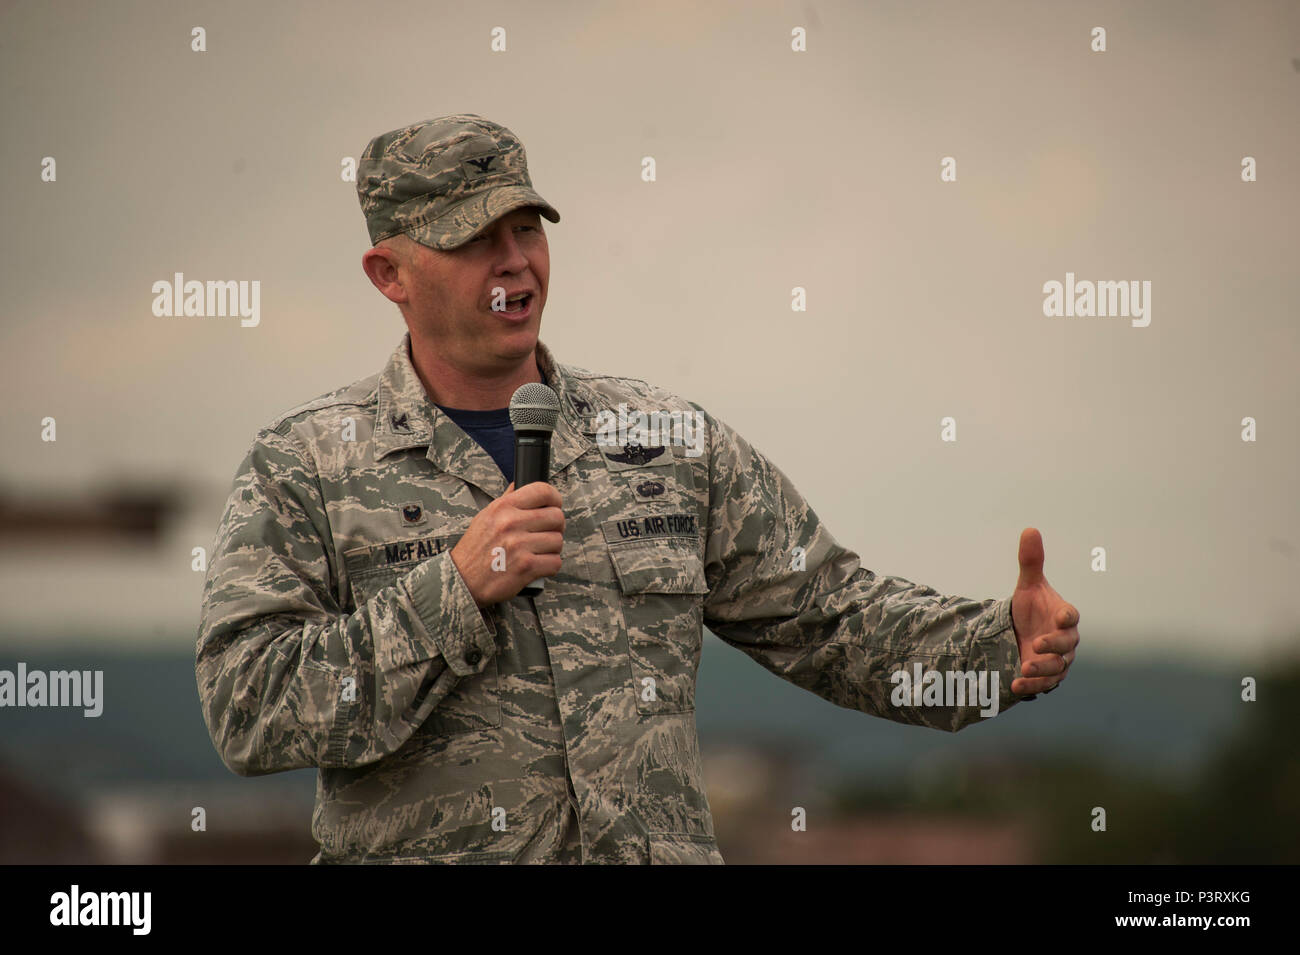 U.S. Air Force Col. Joseph McFall, 52nd Fighter Wing commander, speaks at the opening ceremony of Relay For Life at Spangdahlem Air Base, Germany, July 29, 2016. Airmen and their families raised more than $12,000 for the American Cancer Society during this 24-hour relay event. (U.S. Air Force photo by Staff Sgt. Jonathan Snyder/Released) Stock Photo